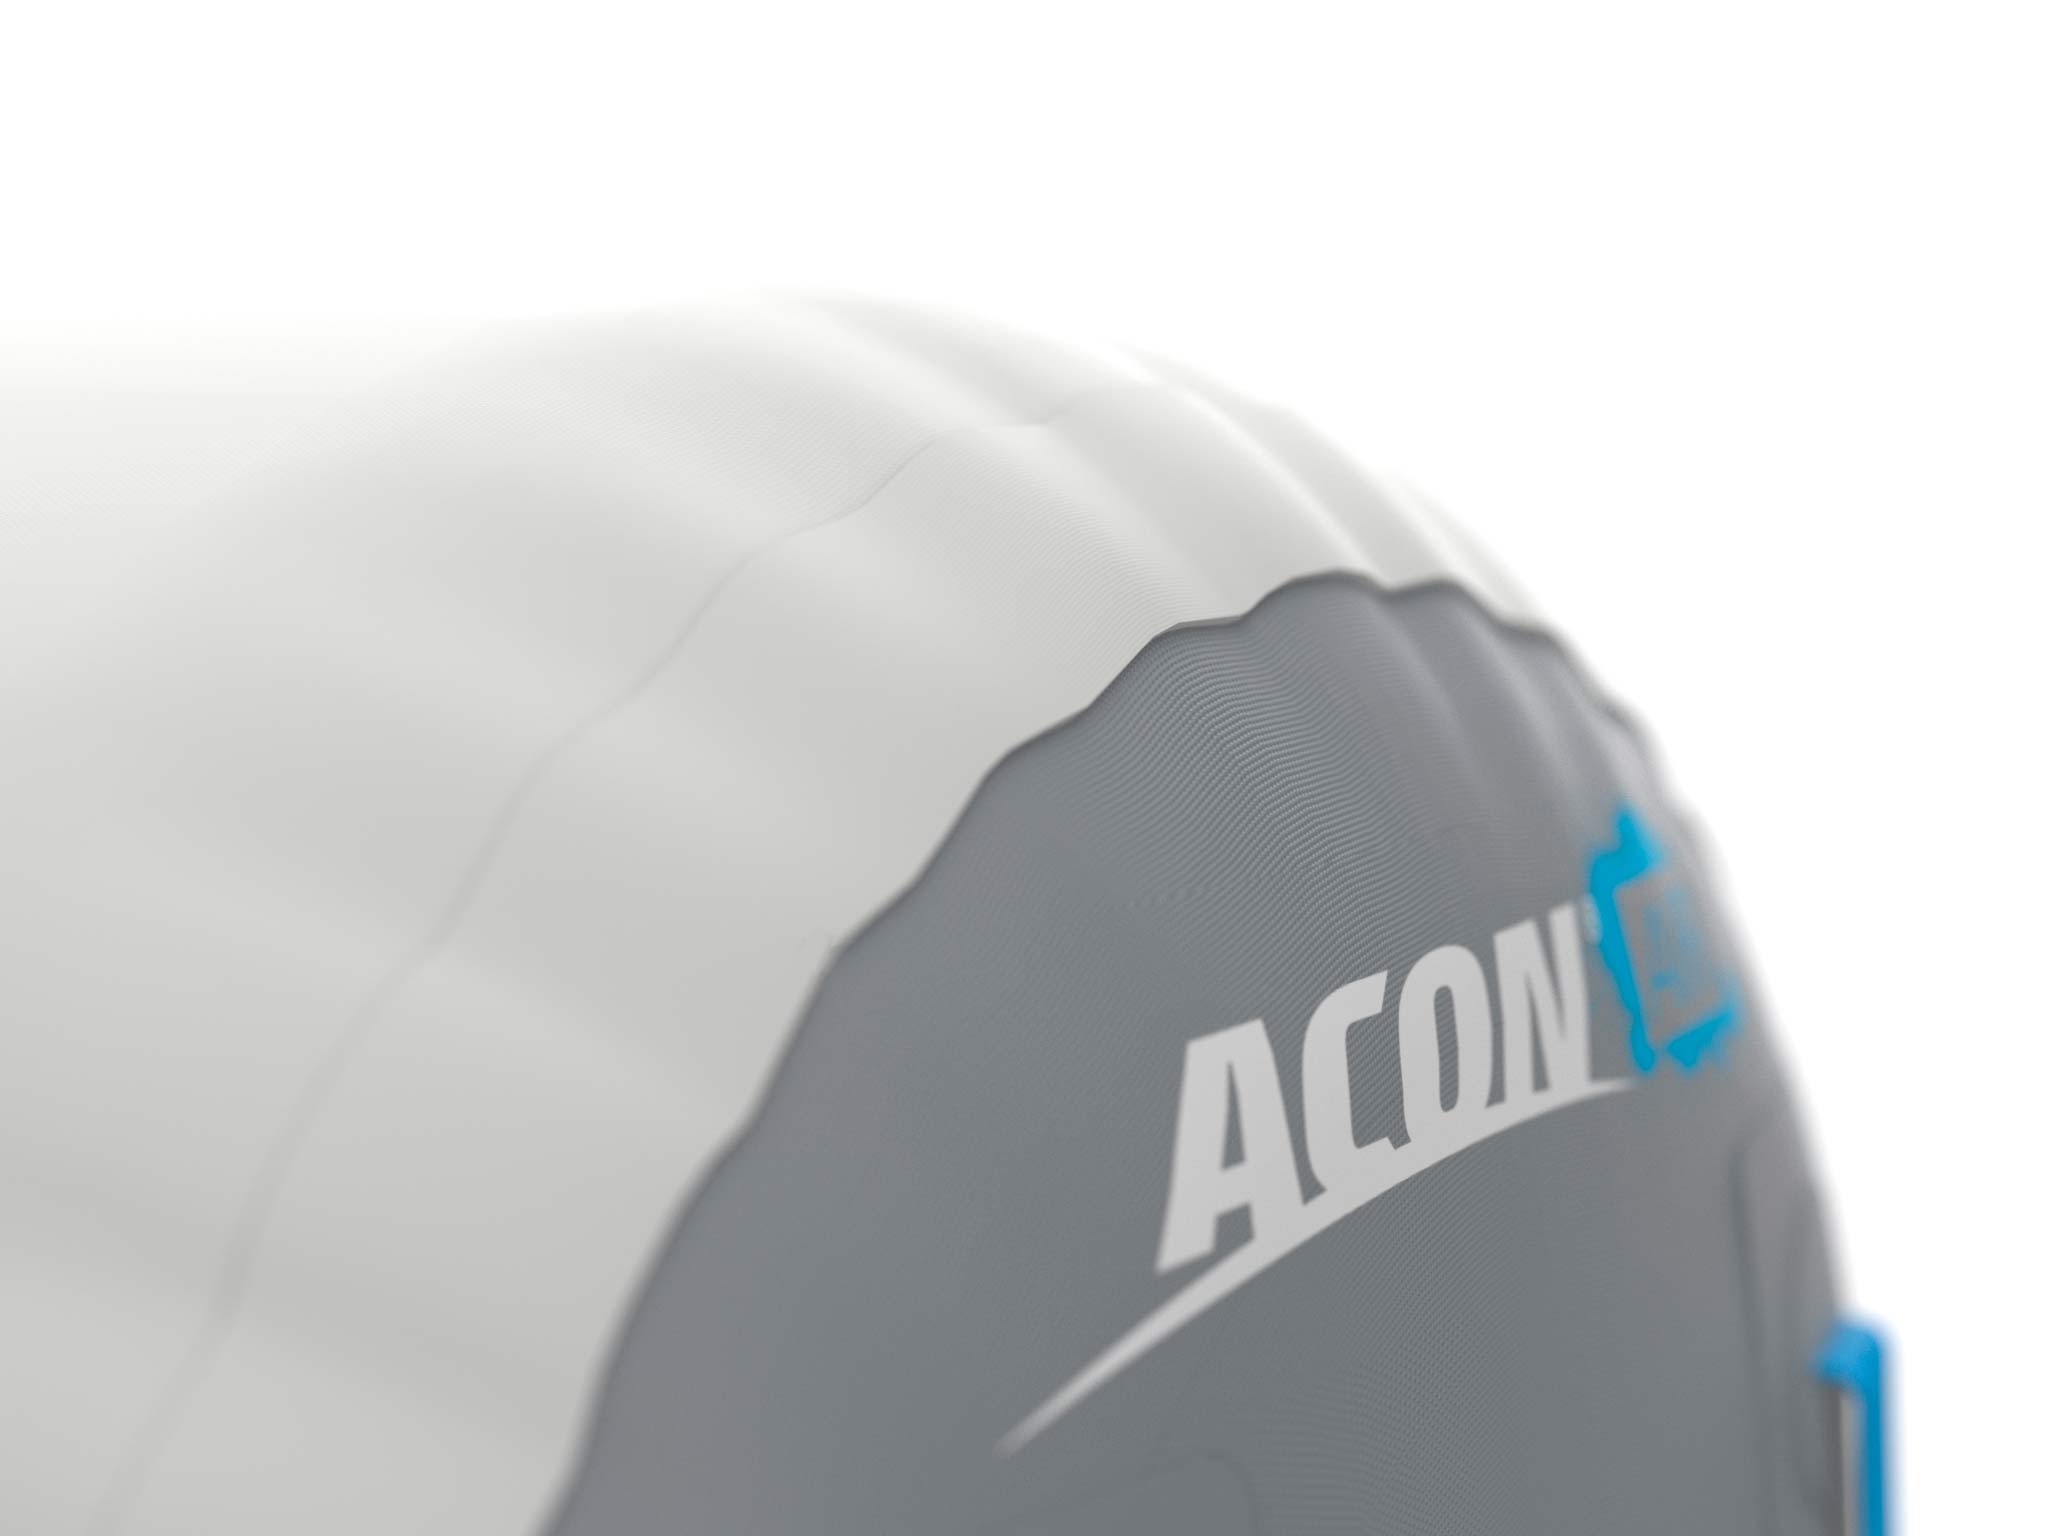 ACON AirRoll for Tricking and Gymnastics 24 x 47in - Acon-us - Details ACON logo